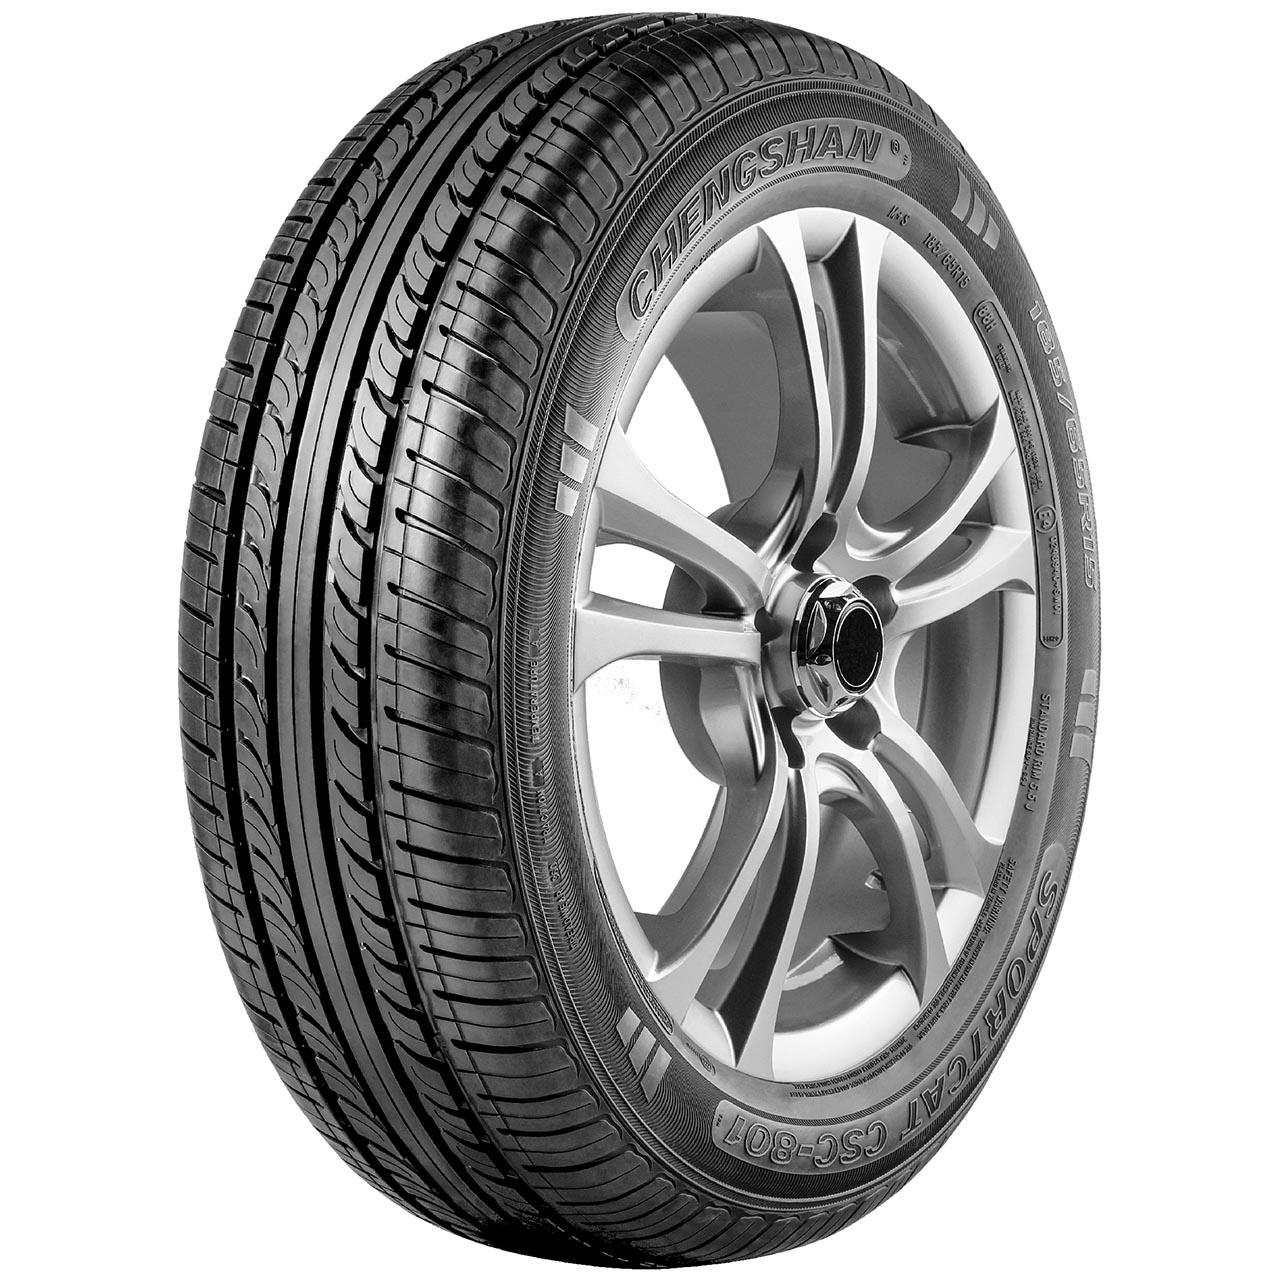 CHENGSHAN SPORTCAT CSC-801 205/60R15 91H BSW